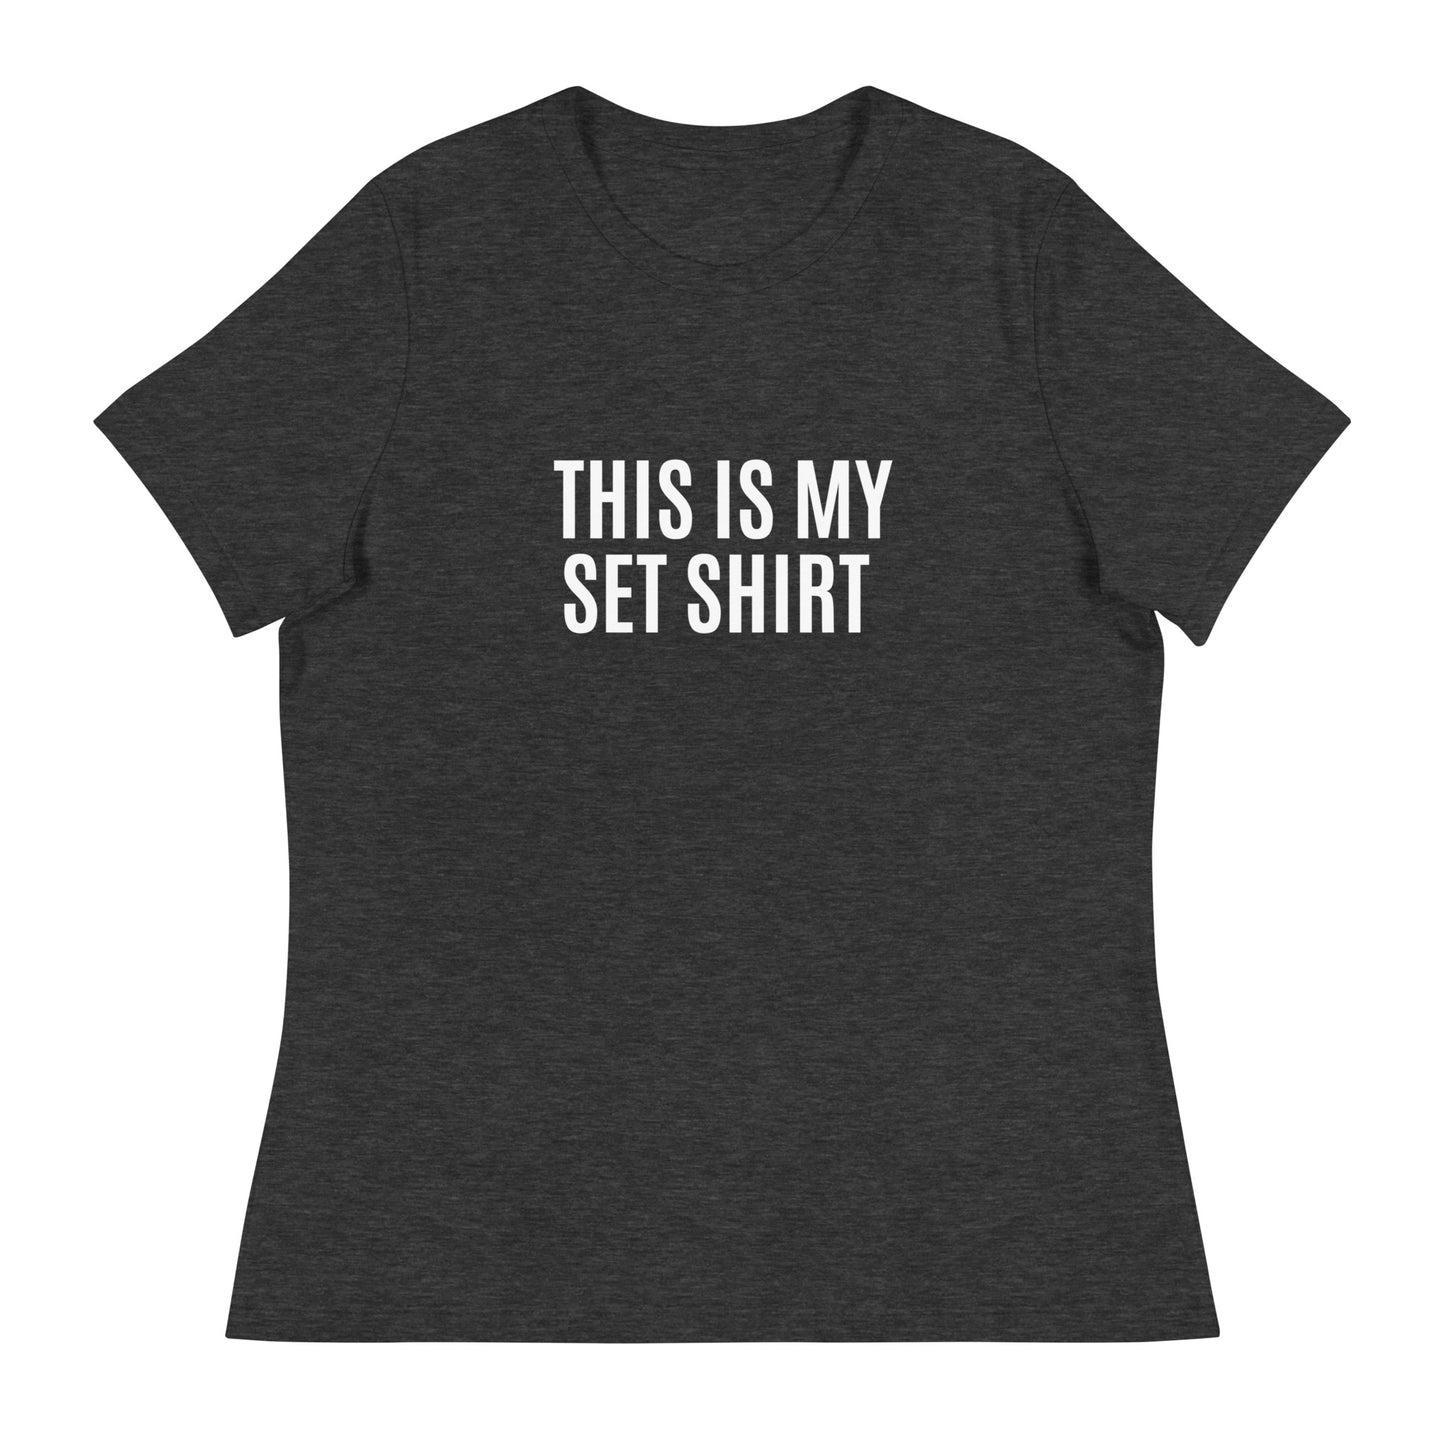 THIS IS MY SET SHIRT.